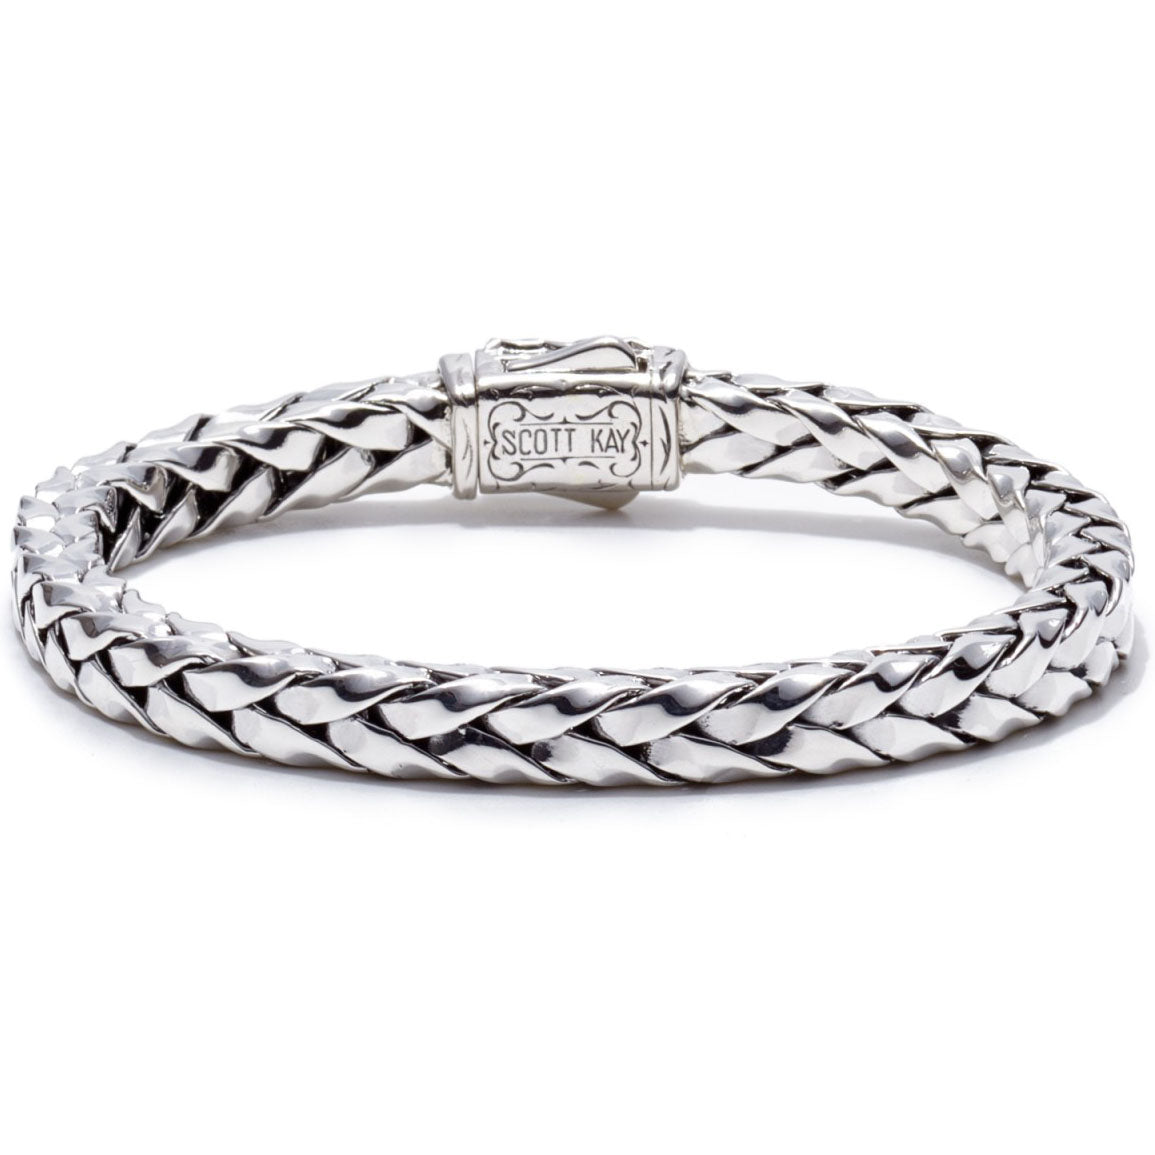 Scott Kay Equestrian Sterling Silver Braided Bracelet, 18K Gold Accent, 7mm wide and 8.5 inches long